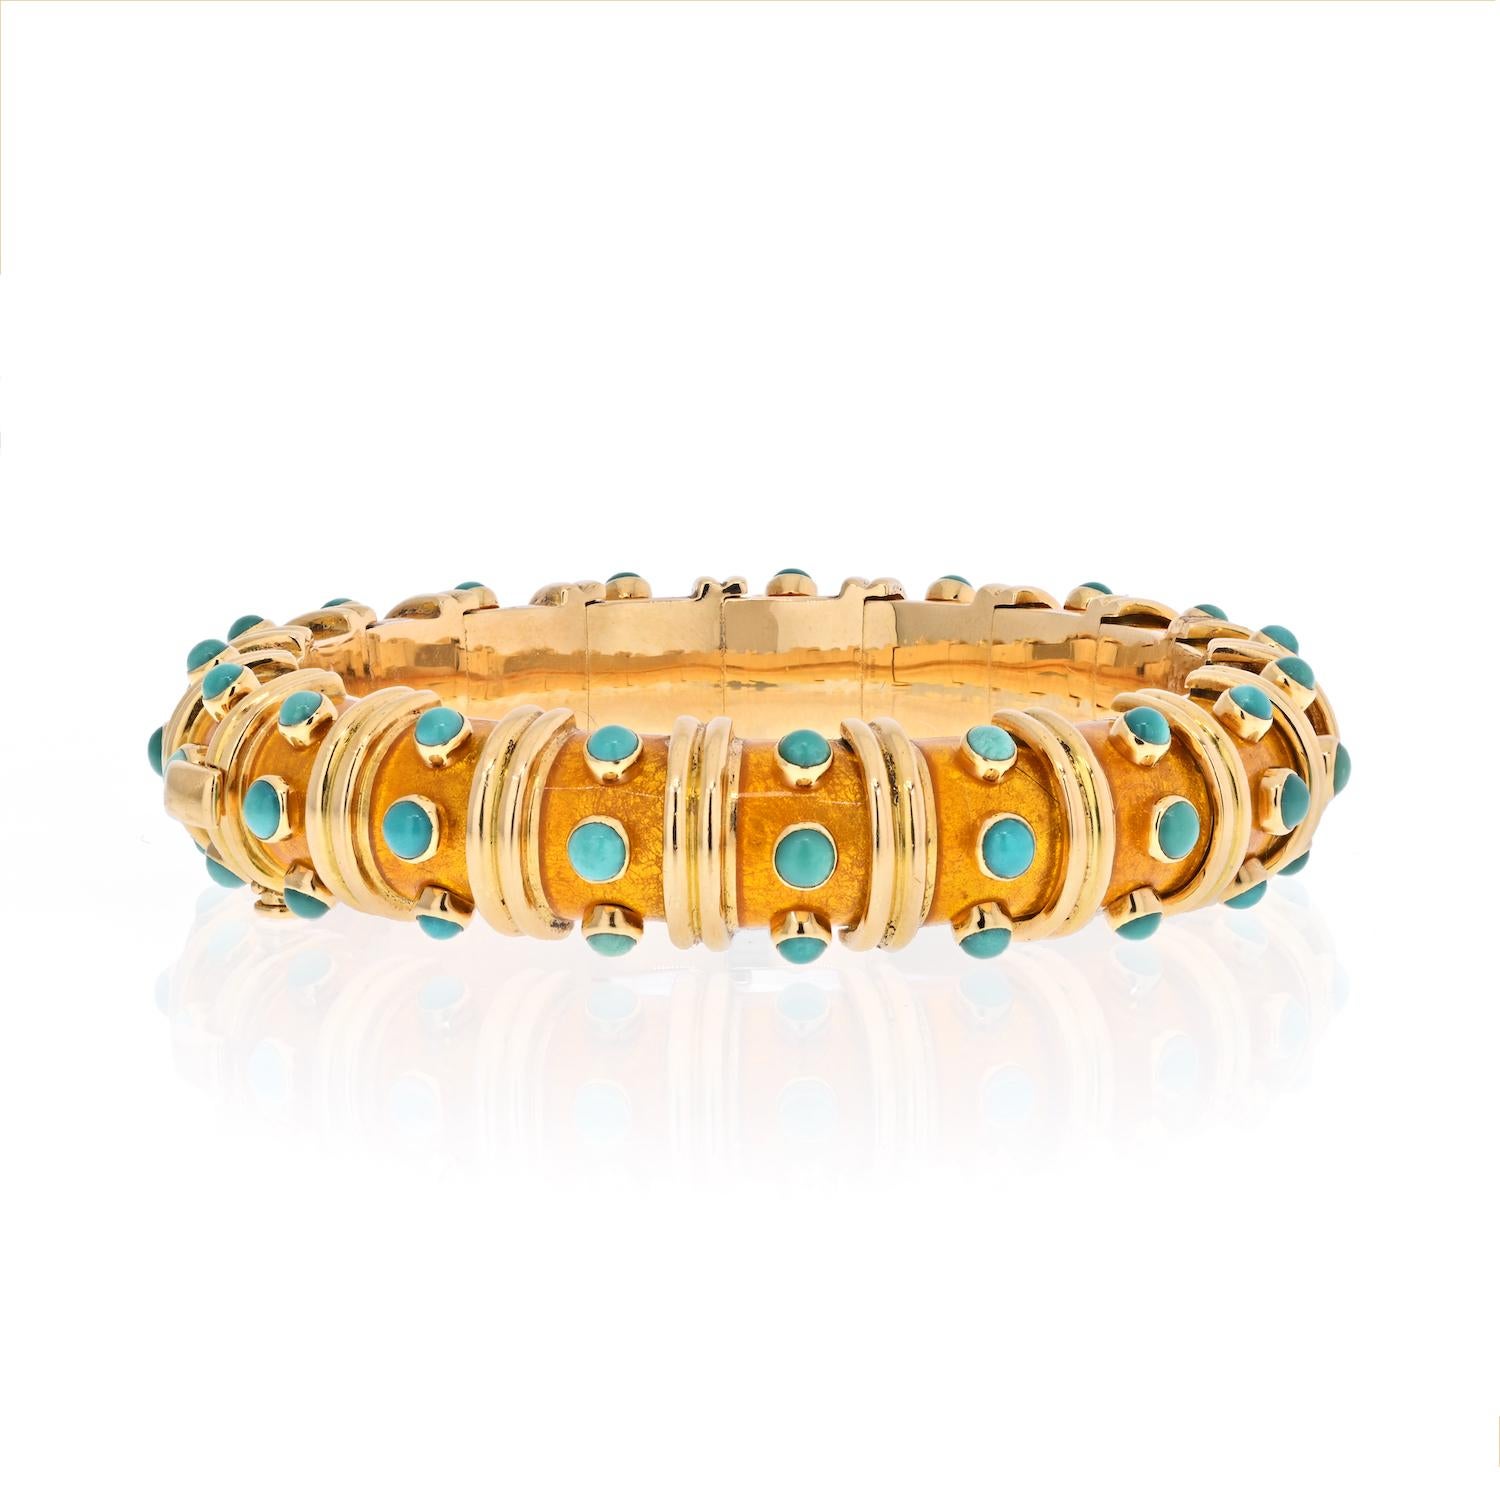 A highly rare and important example from Tiffany & Co. by Jean Schlumberger.  An exceedingly rare enamel color - a stunning copper orange - beautifully offset and tastefully dotted with 57 turquoise cabochons.
The bracelet is 13mm wide and about